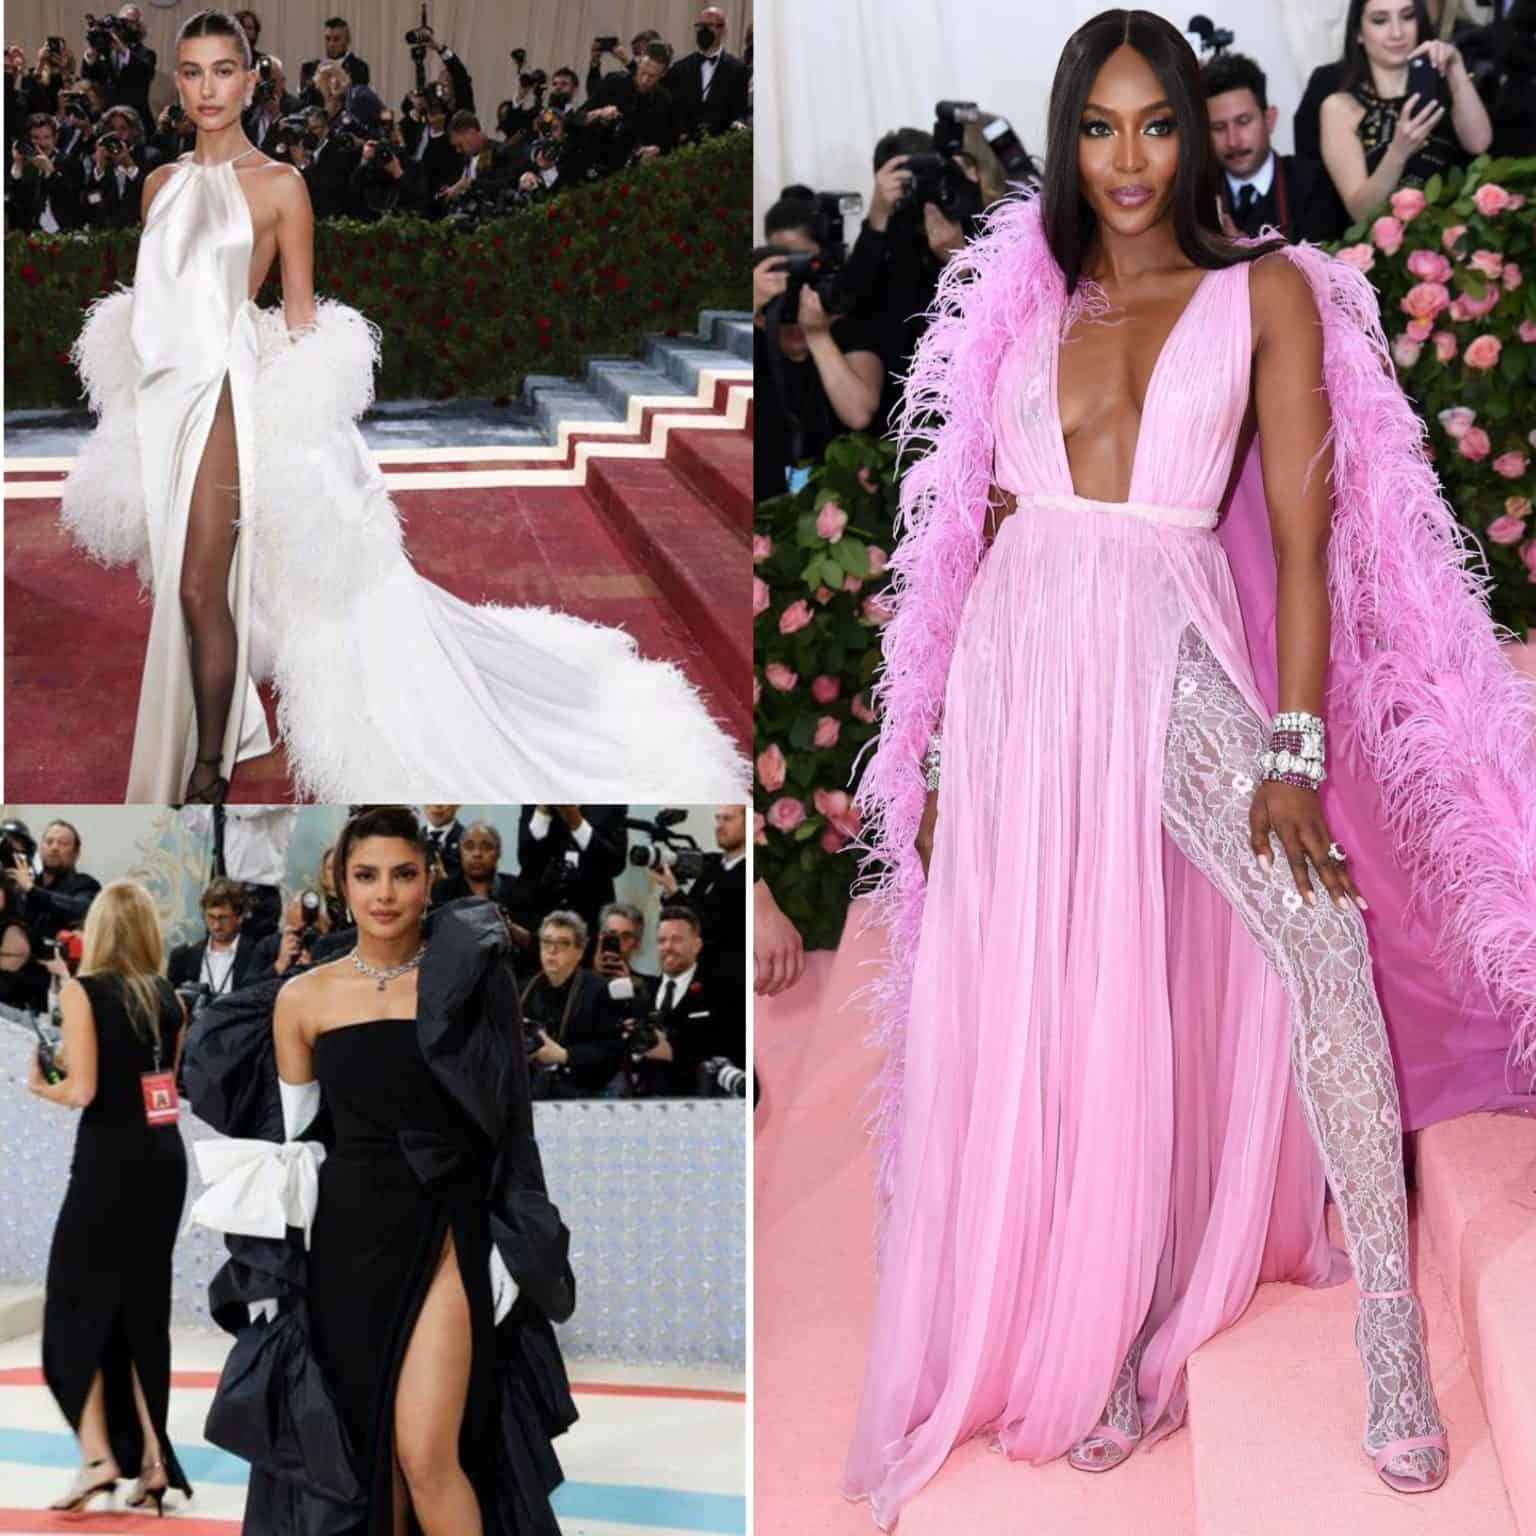 25 Inside Facts About Met Gala You Need to Know! - OtakuKart